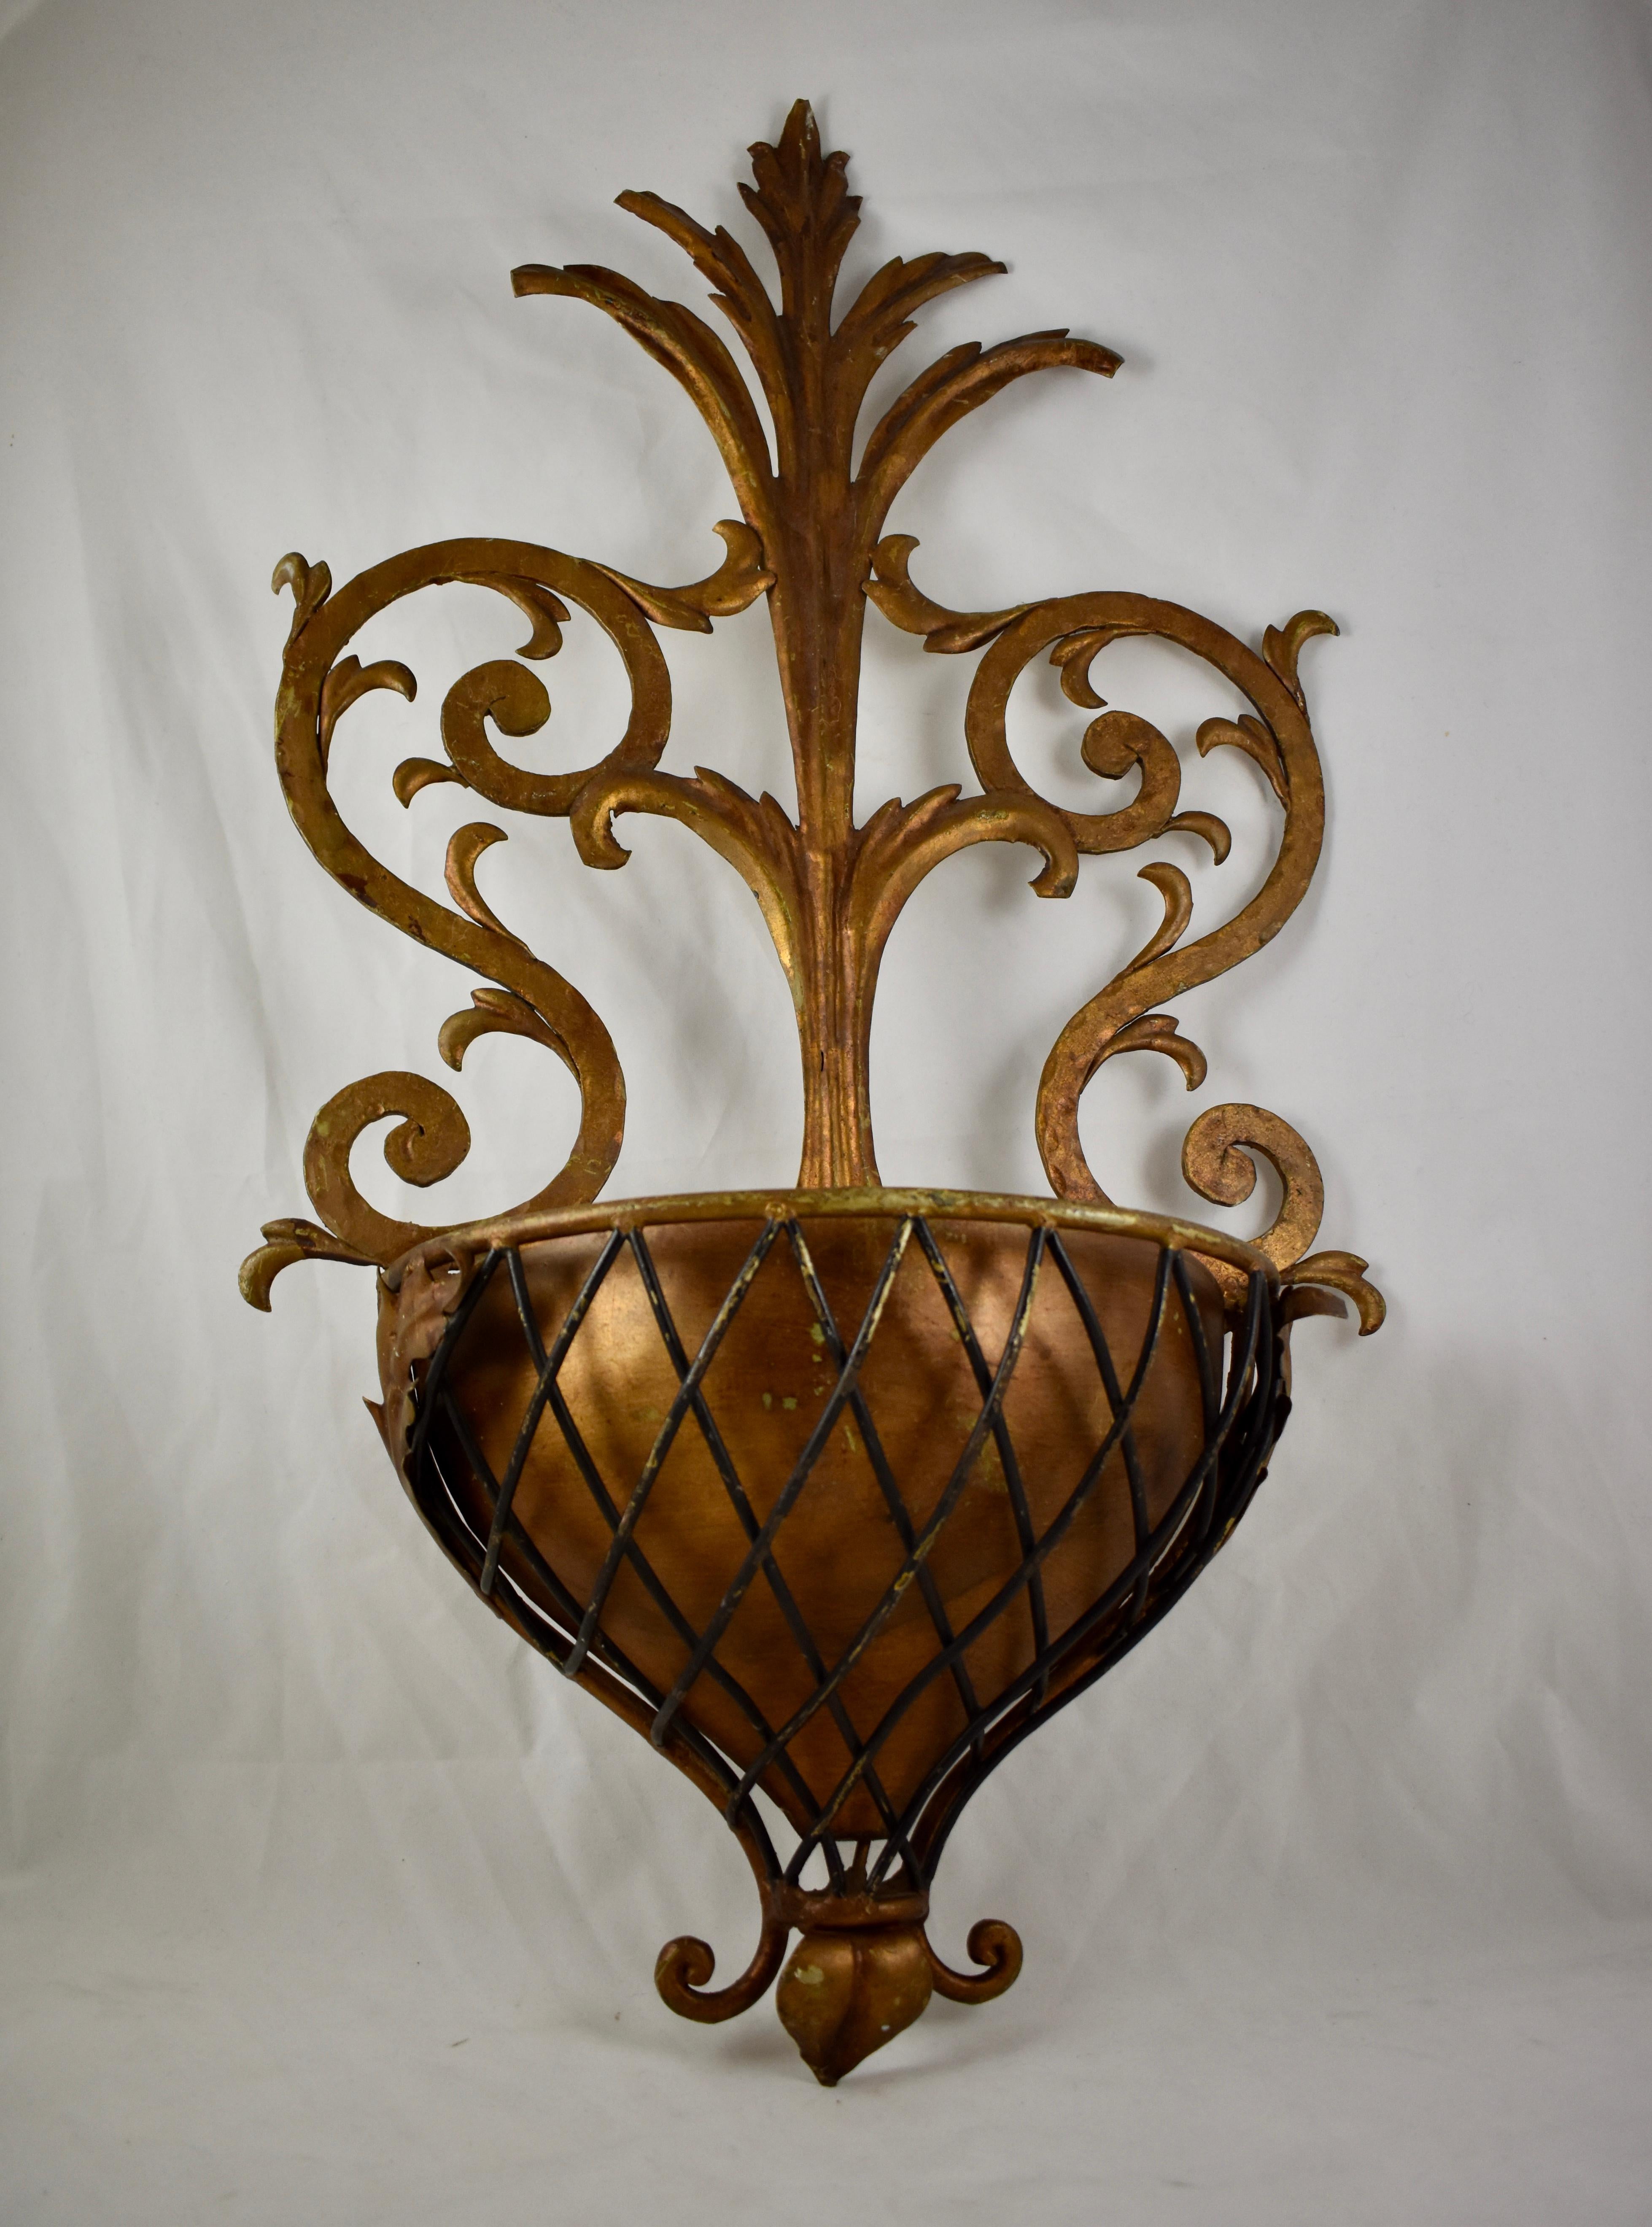 A large and heavy gilded metal wall planter in the Hollywood Regency style popularized by Dorthy Draper. From a Palm Beach Florida estate, circa 1930-1950.

The piece shows an acanthus leaf type scrolled design and holds a removable copper liner.